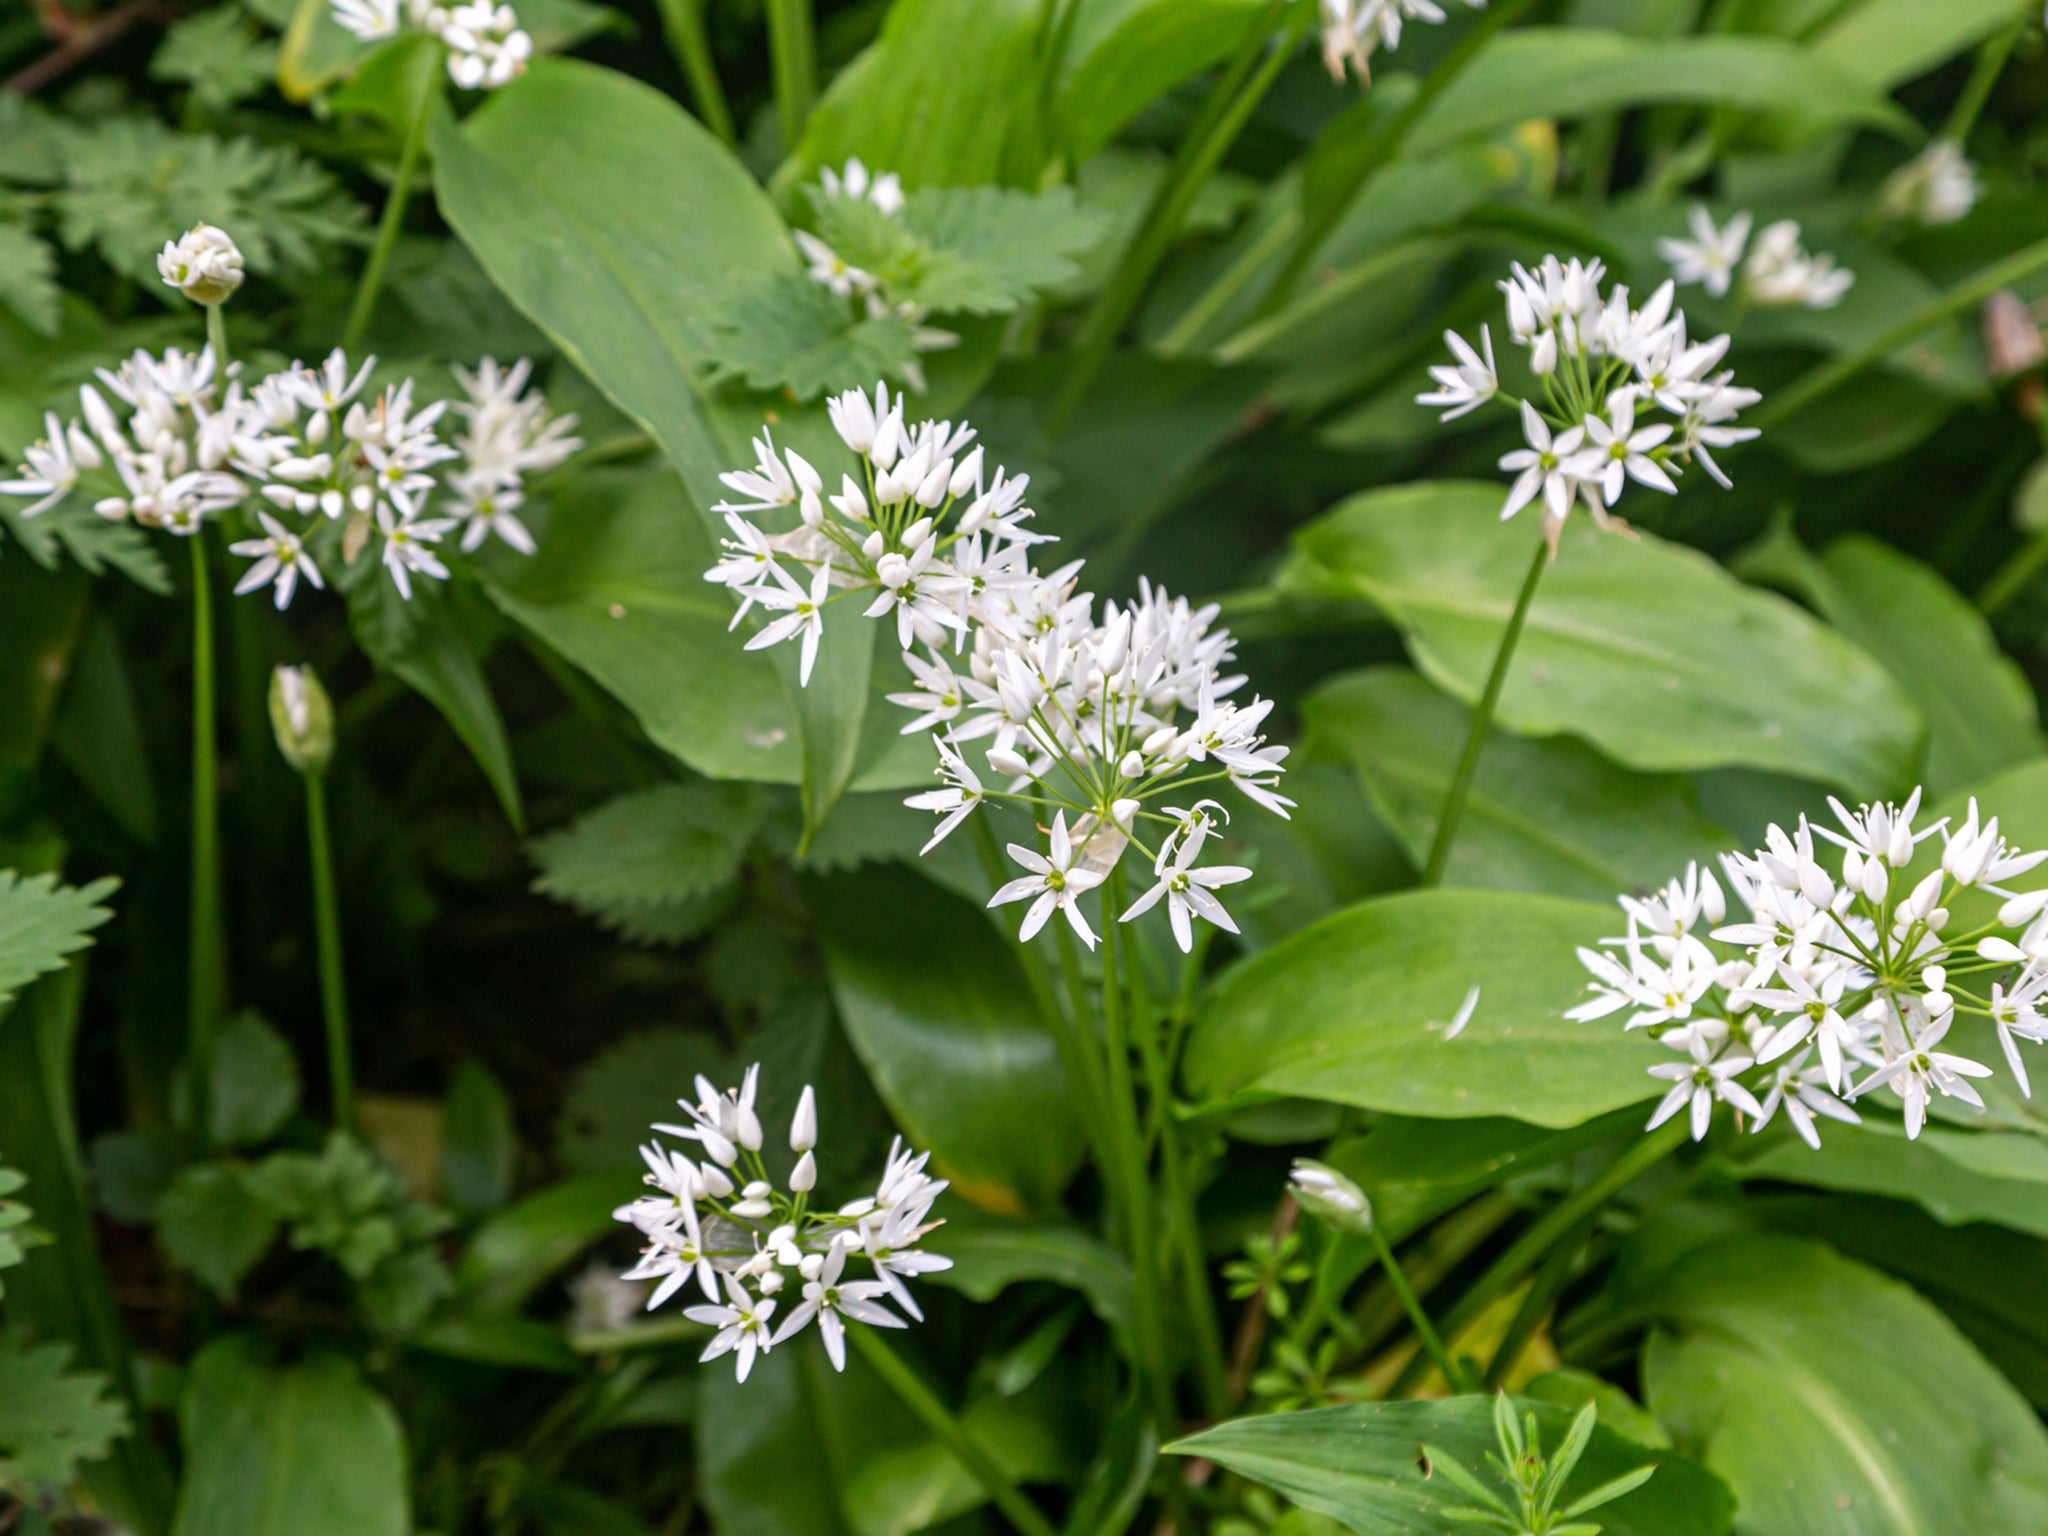 Keep an eye (and a nose) out for a wild garlic on your next spring walk